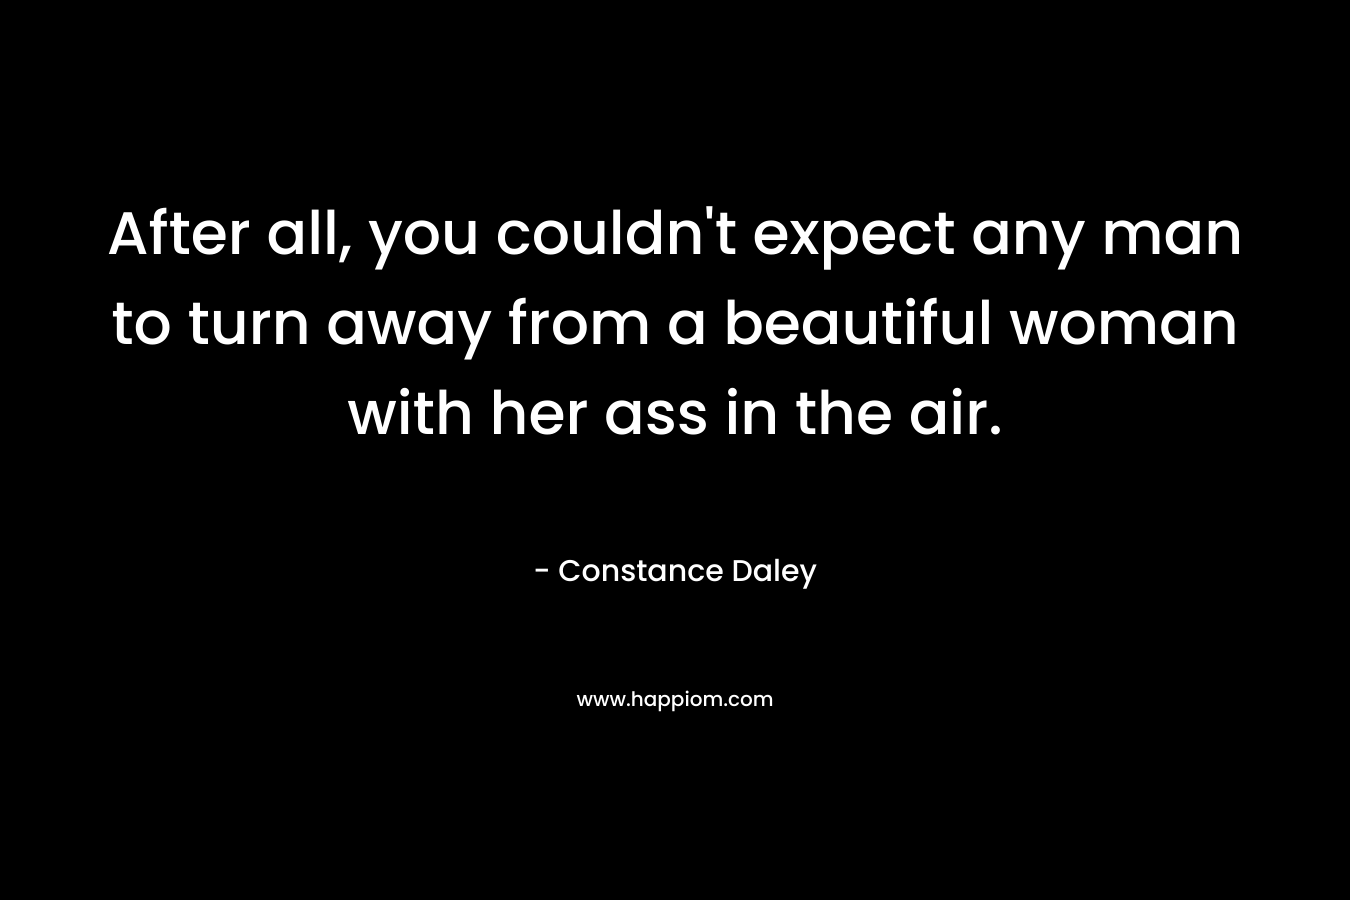 After all, you couldn’t expect any man to turn away from a beautiful woman with her ass in the air. – Constance Daley